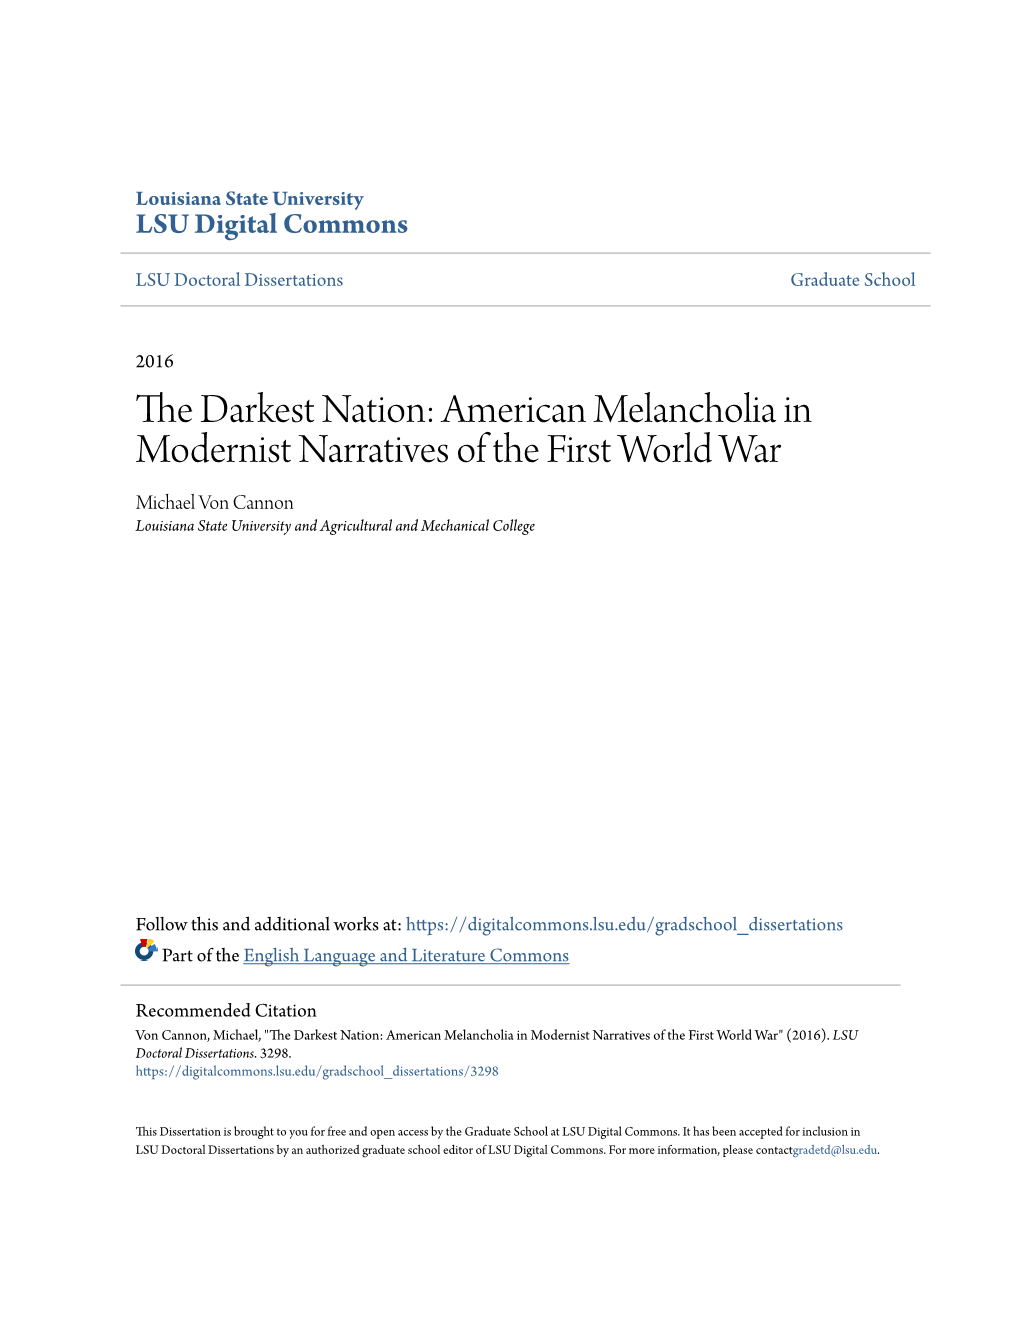 American Melancholia in Modernist Narratives of the First World War Michael Von Cannon Louisiana State University and Agricultural and Mechanical College